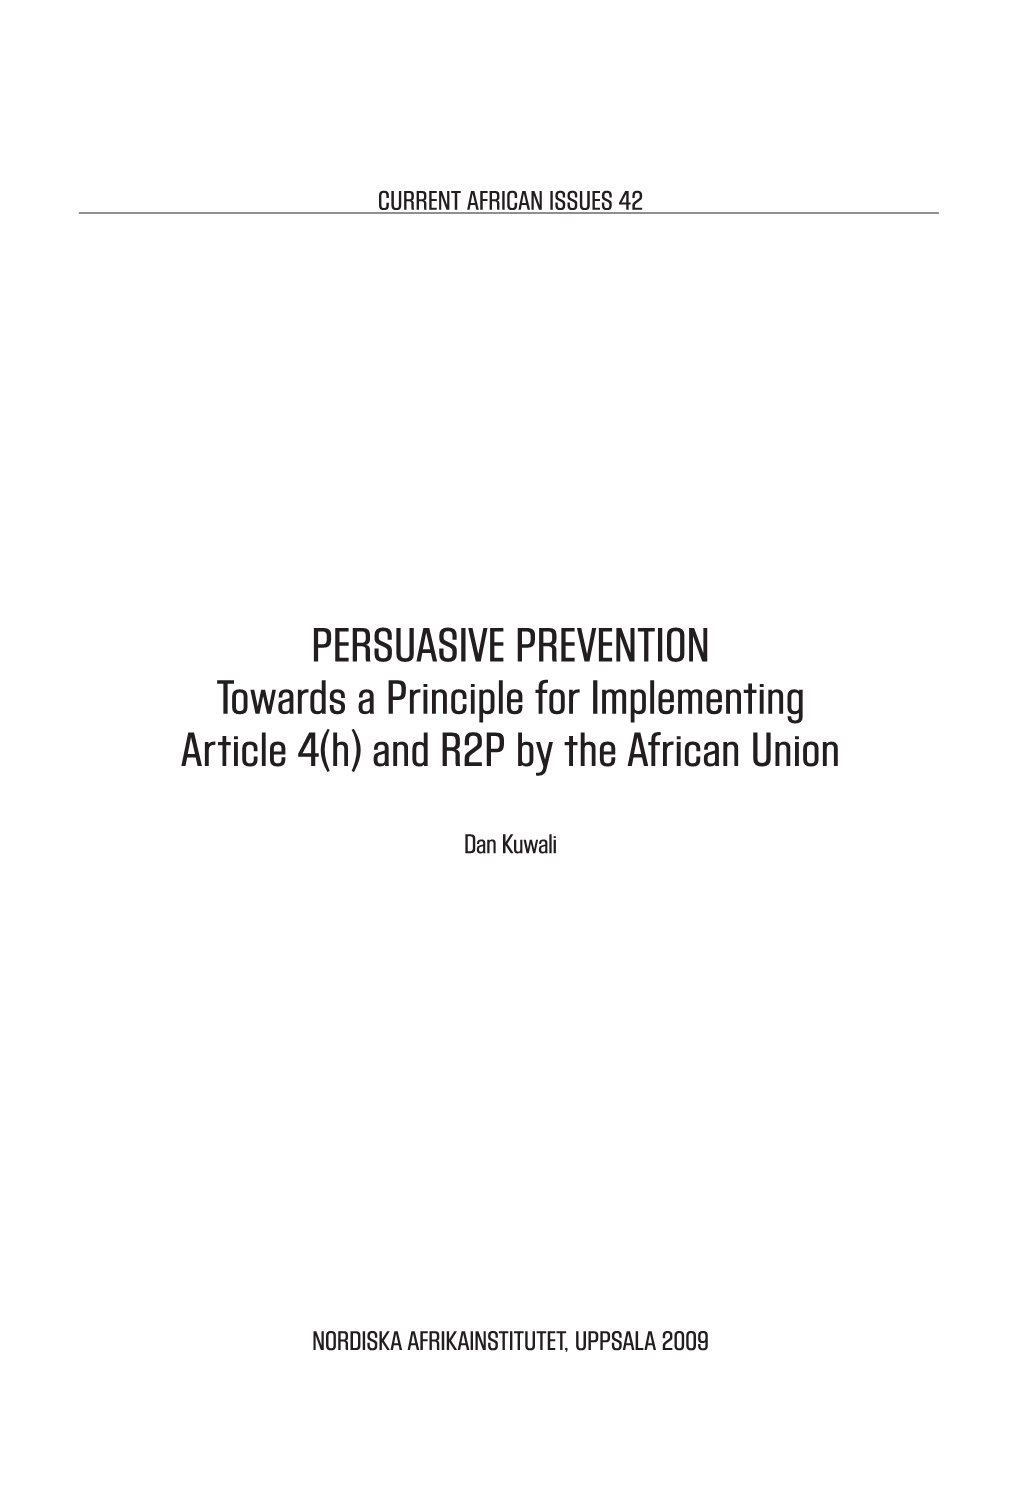 Pursuasive Prevention Towards a Princile for Implementing Article 4(H